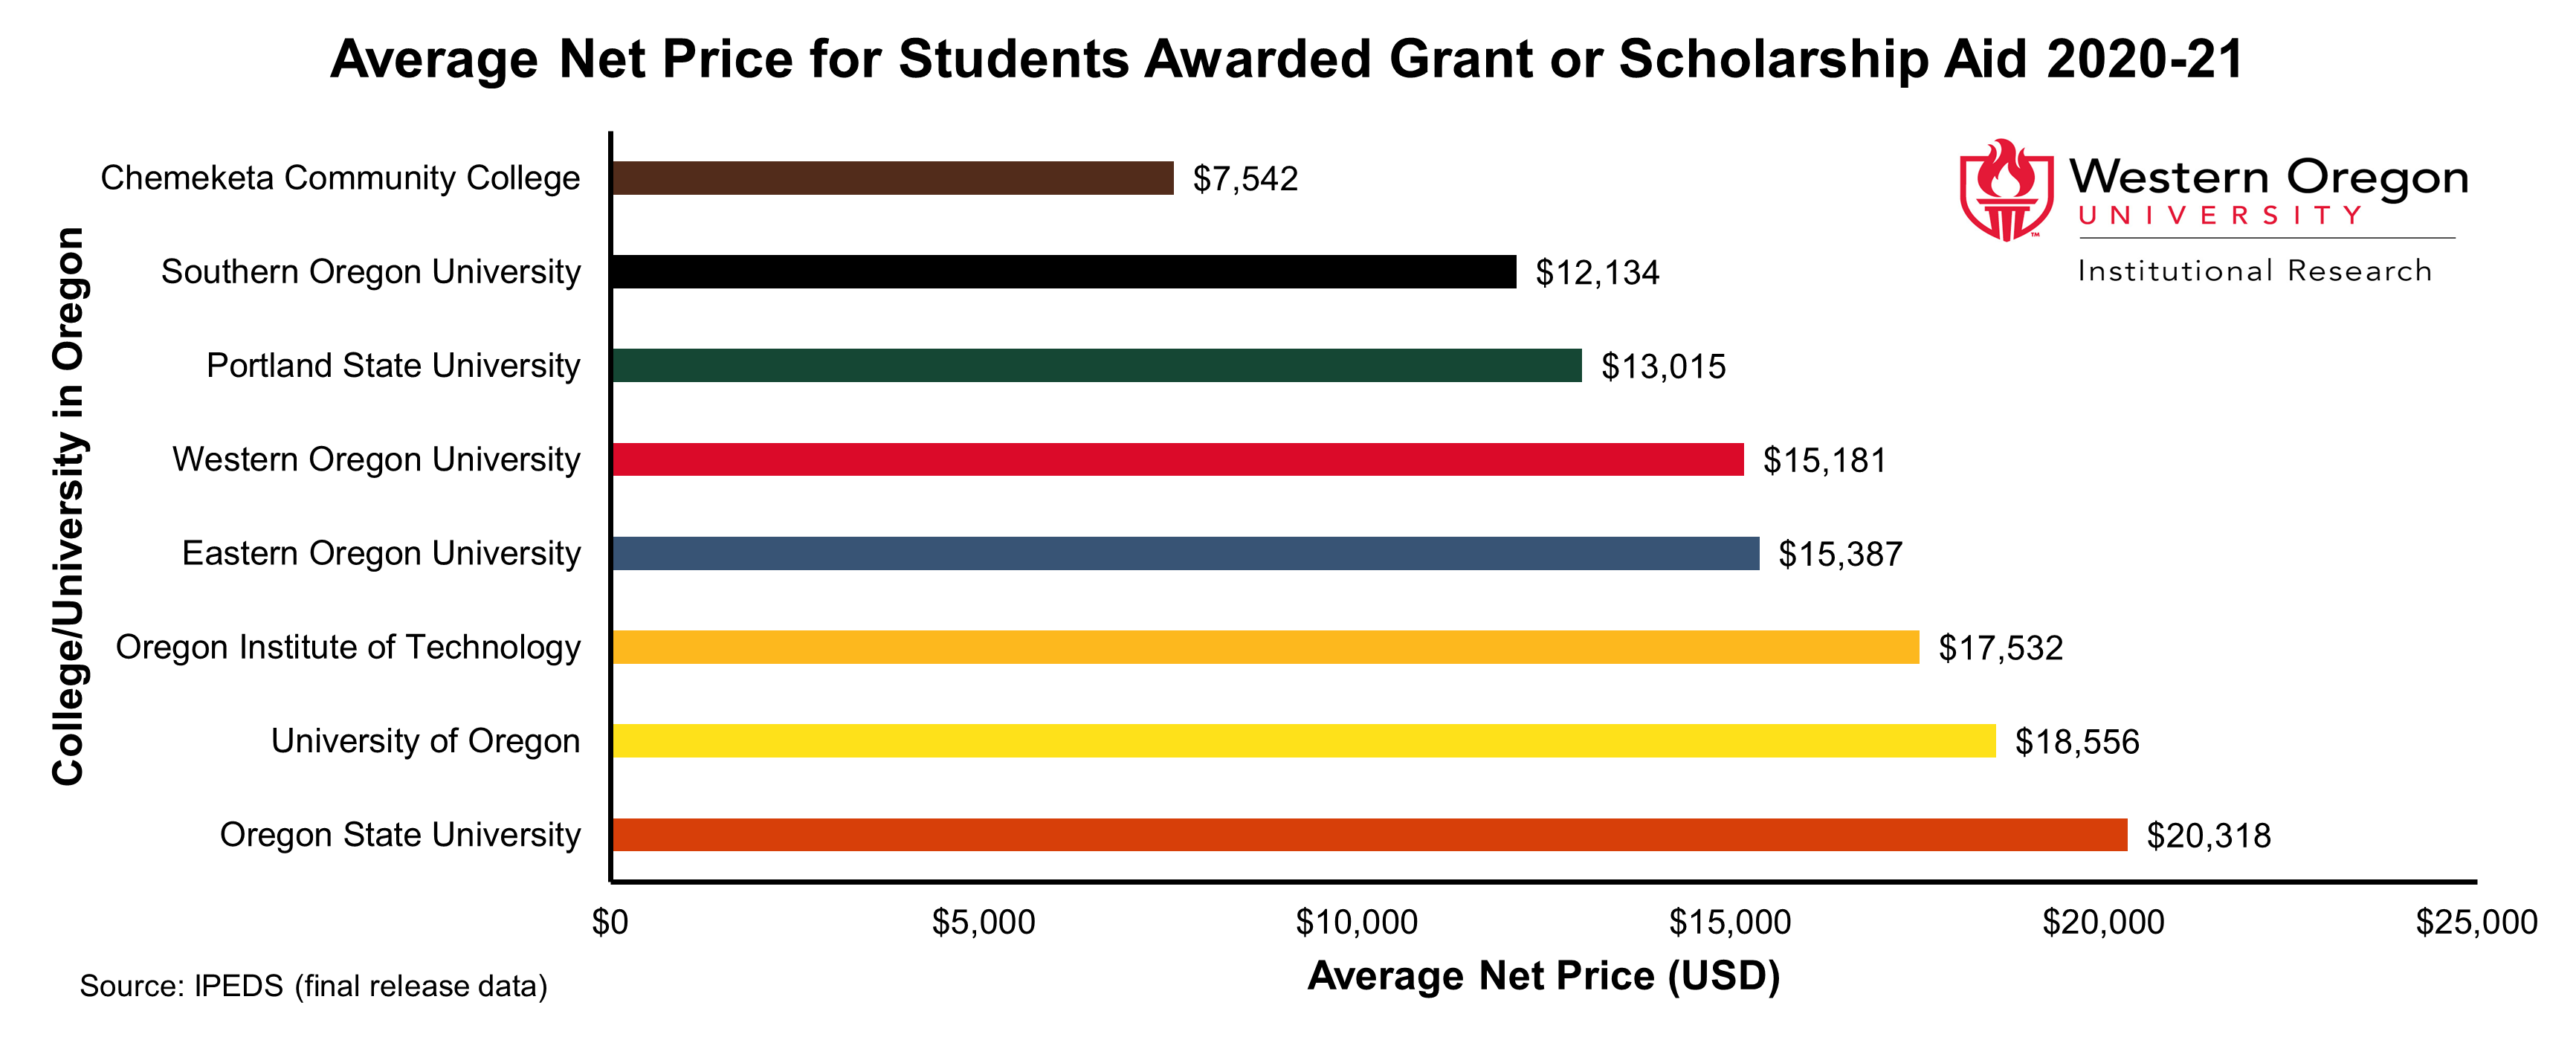 Bar graph of average net price for students awarded grant or scholarship aid at WOU and Other Public Universities in the 2020-2021 school year, showing that WOU is near the median on average net price